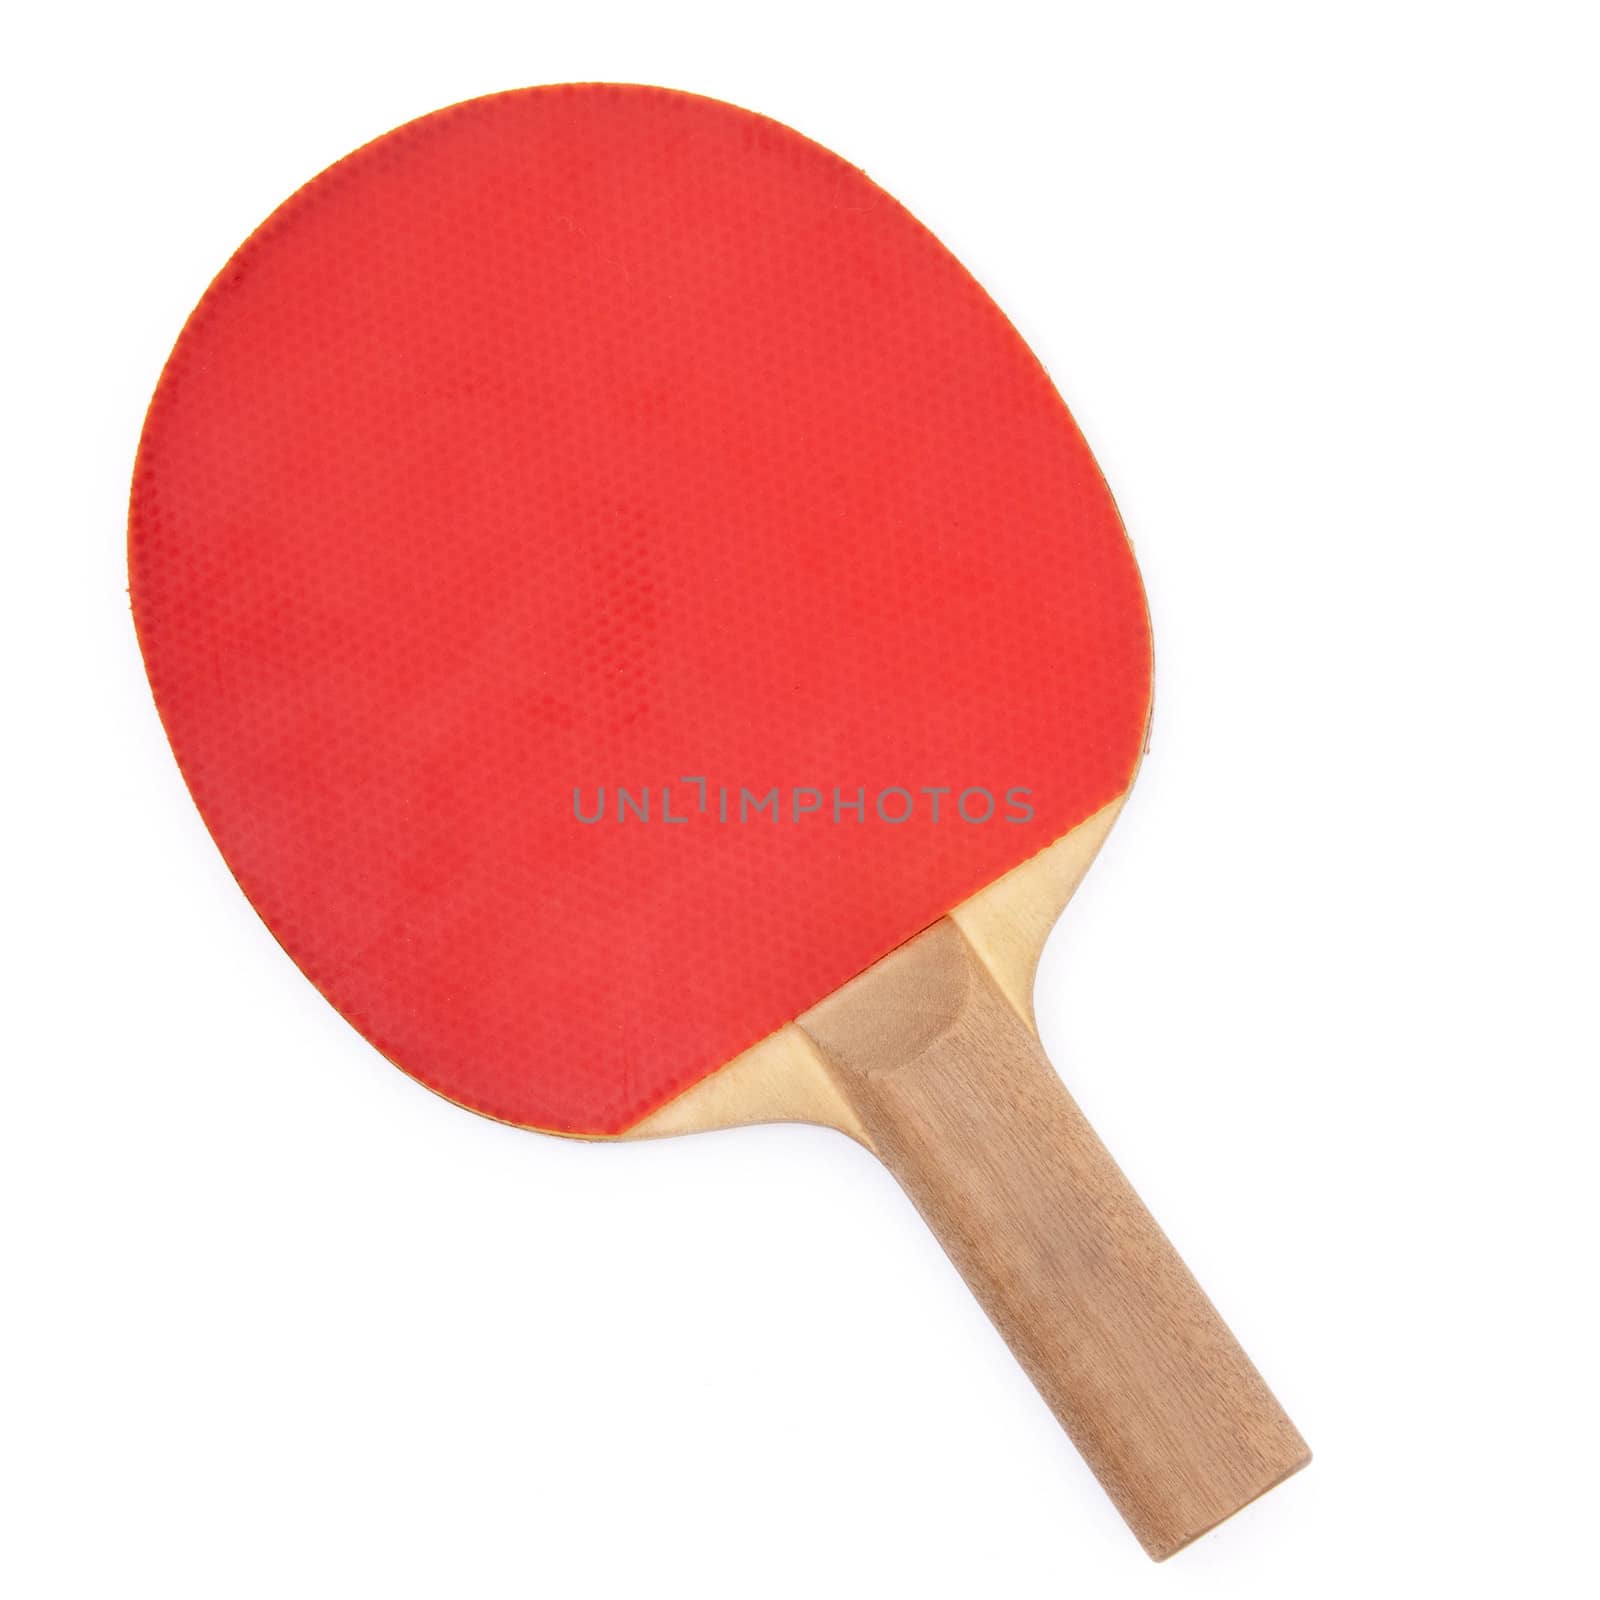 Ping pong paddle isolated on white by shutswis